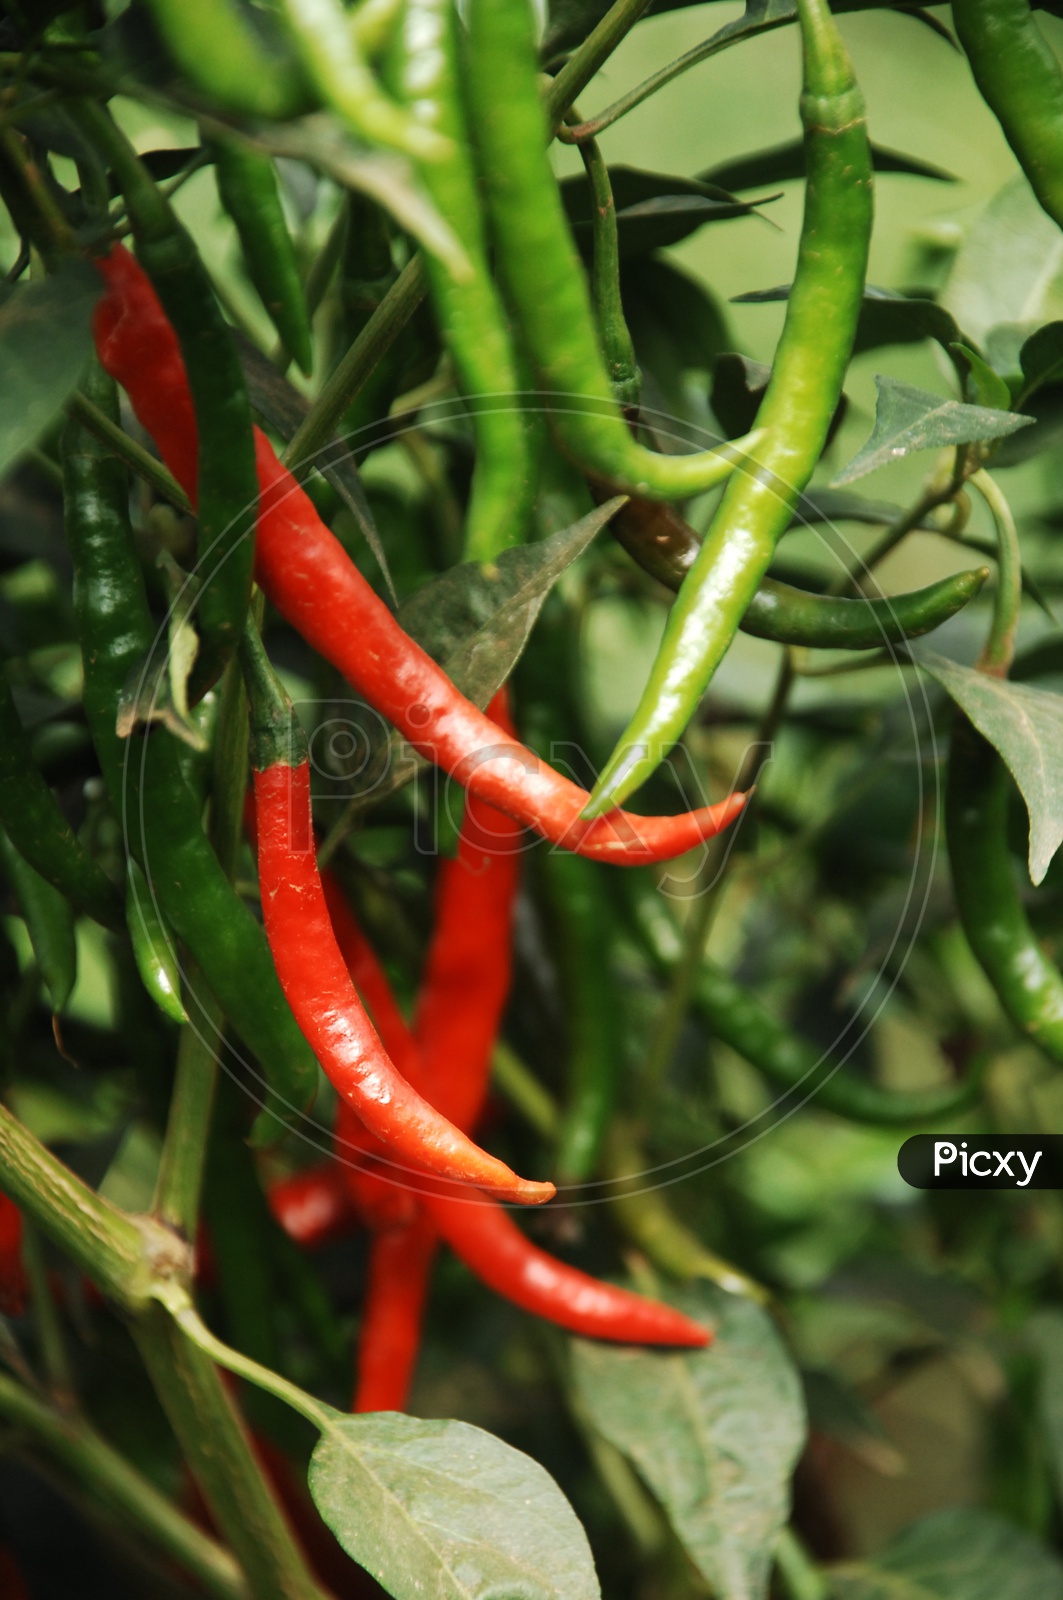 Chillies on The Plants in a Farm Field